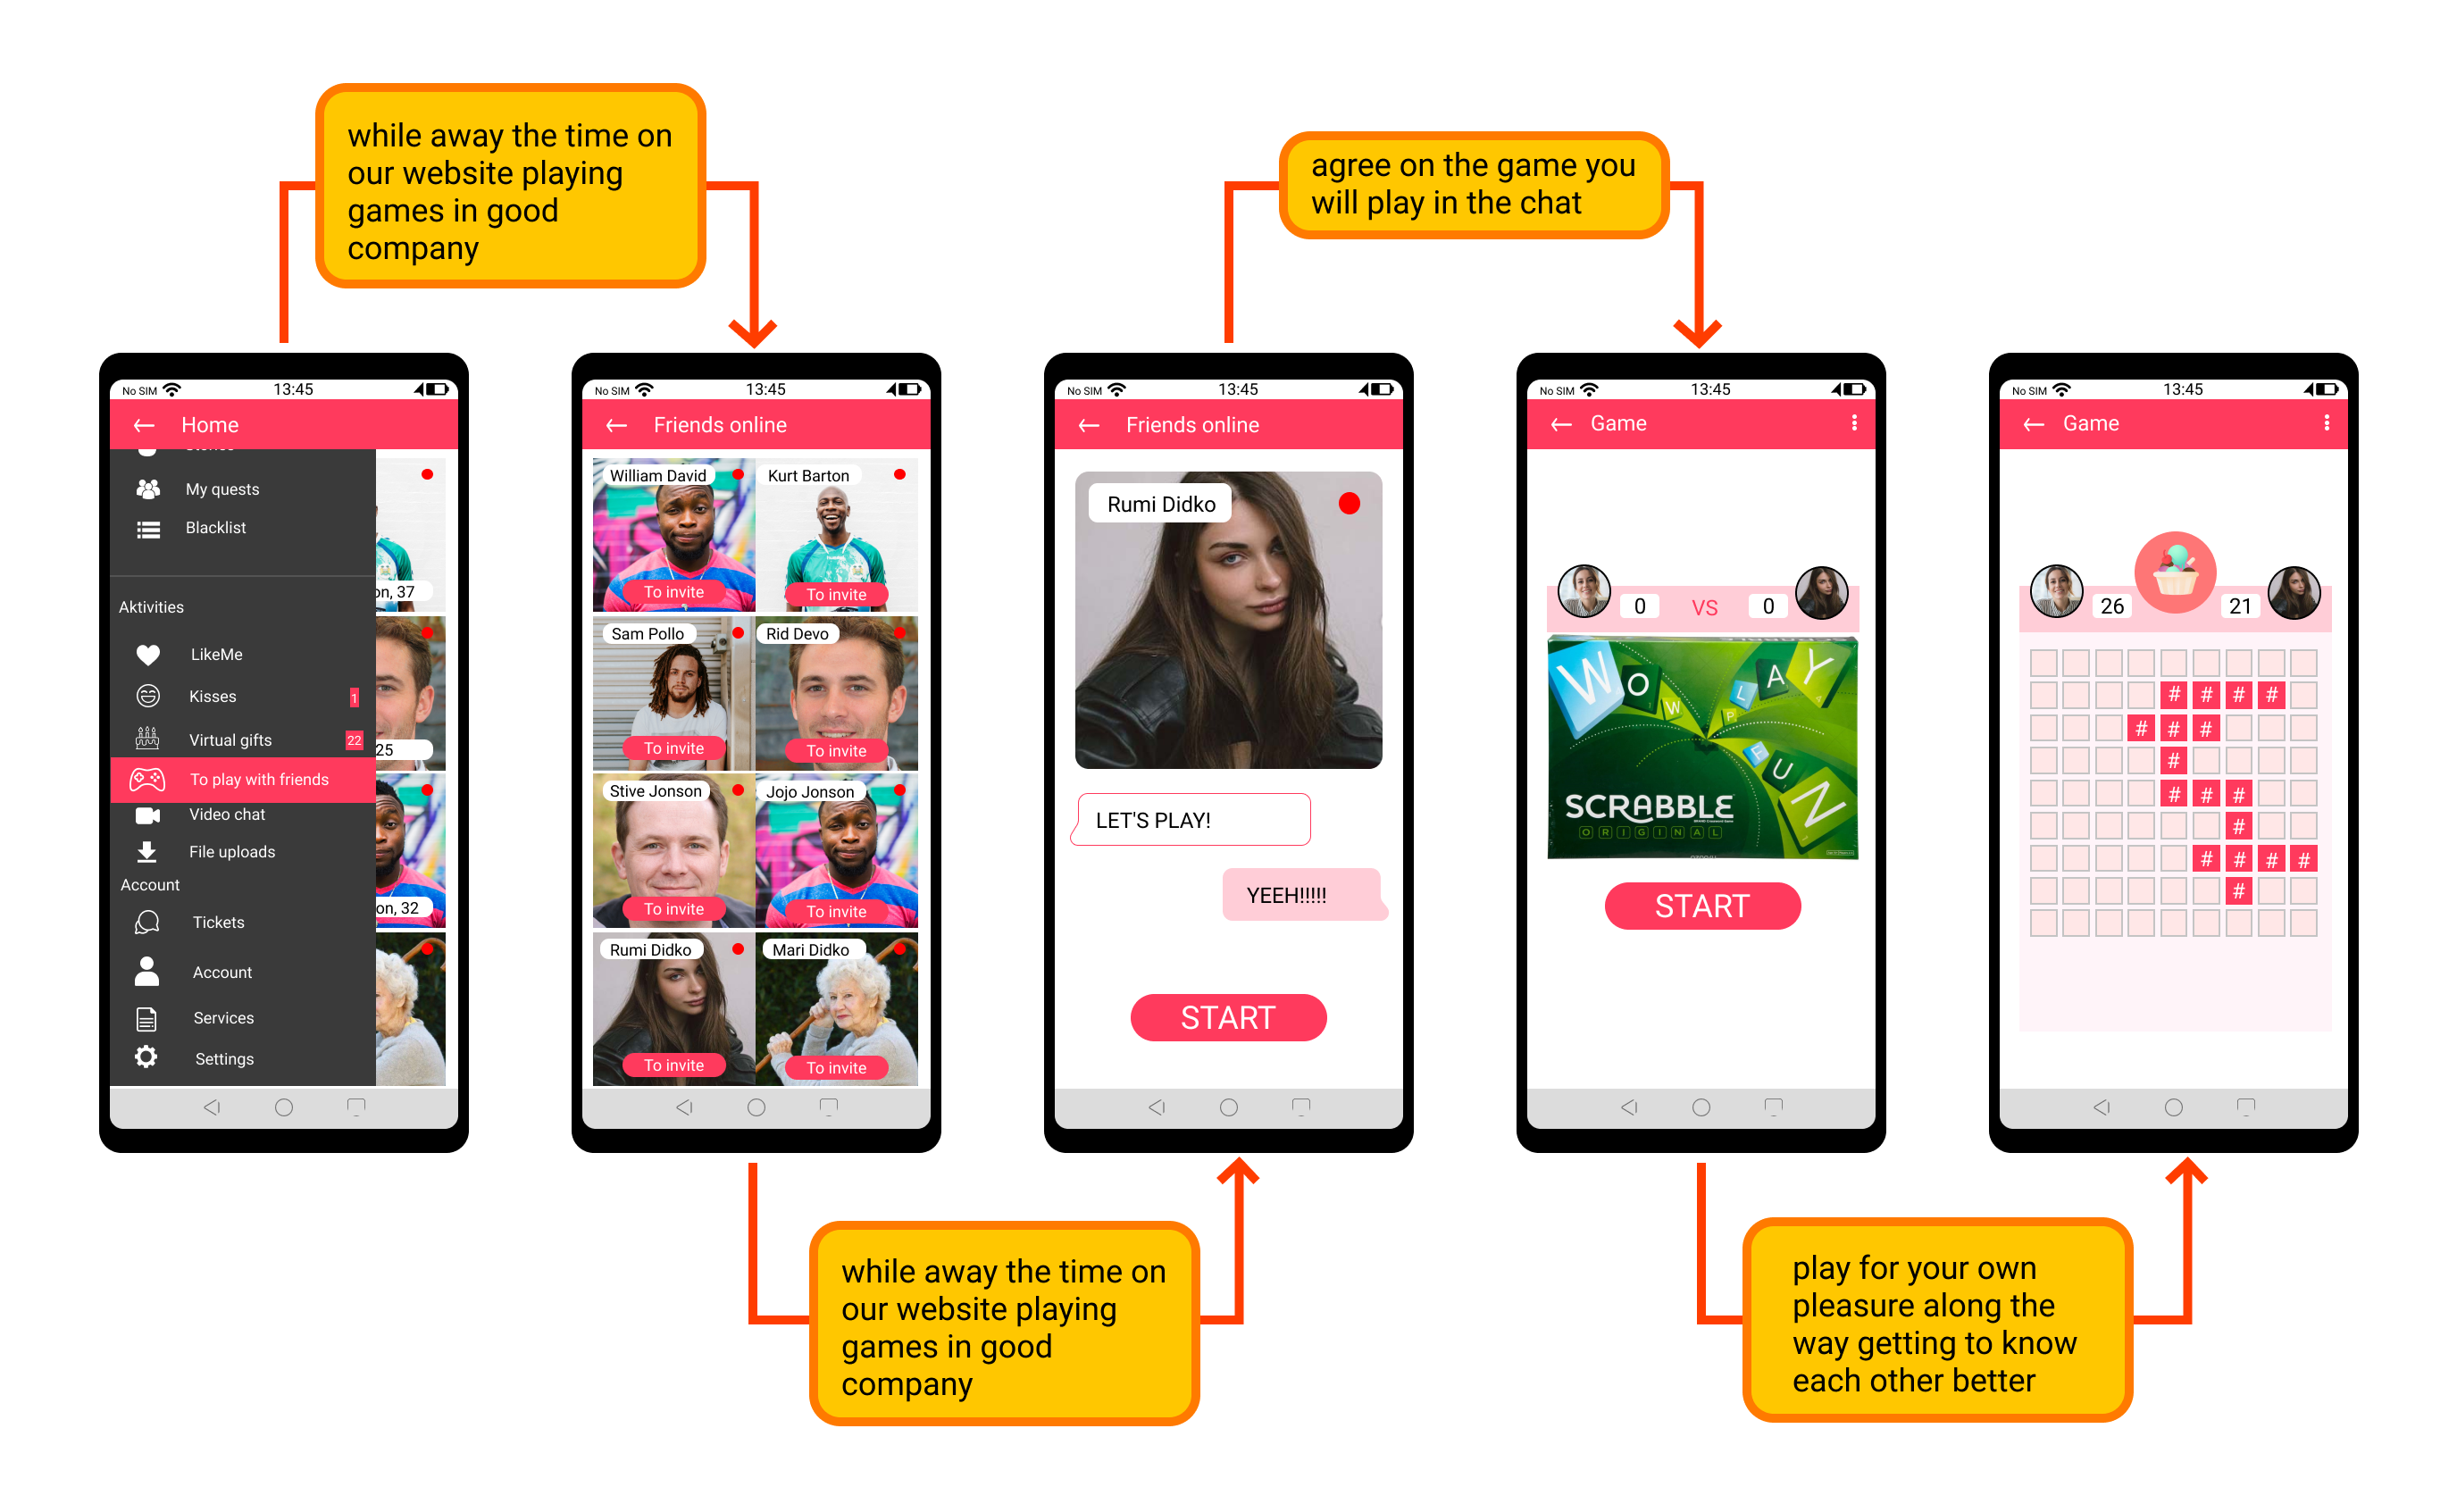 Mobile games increase engagement and retention by adding games to your dating app